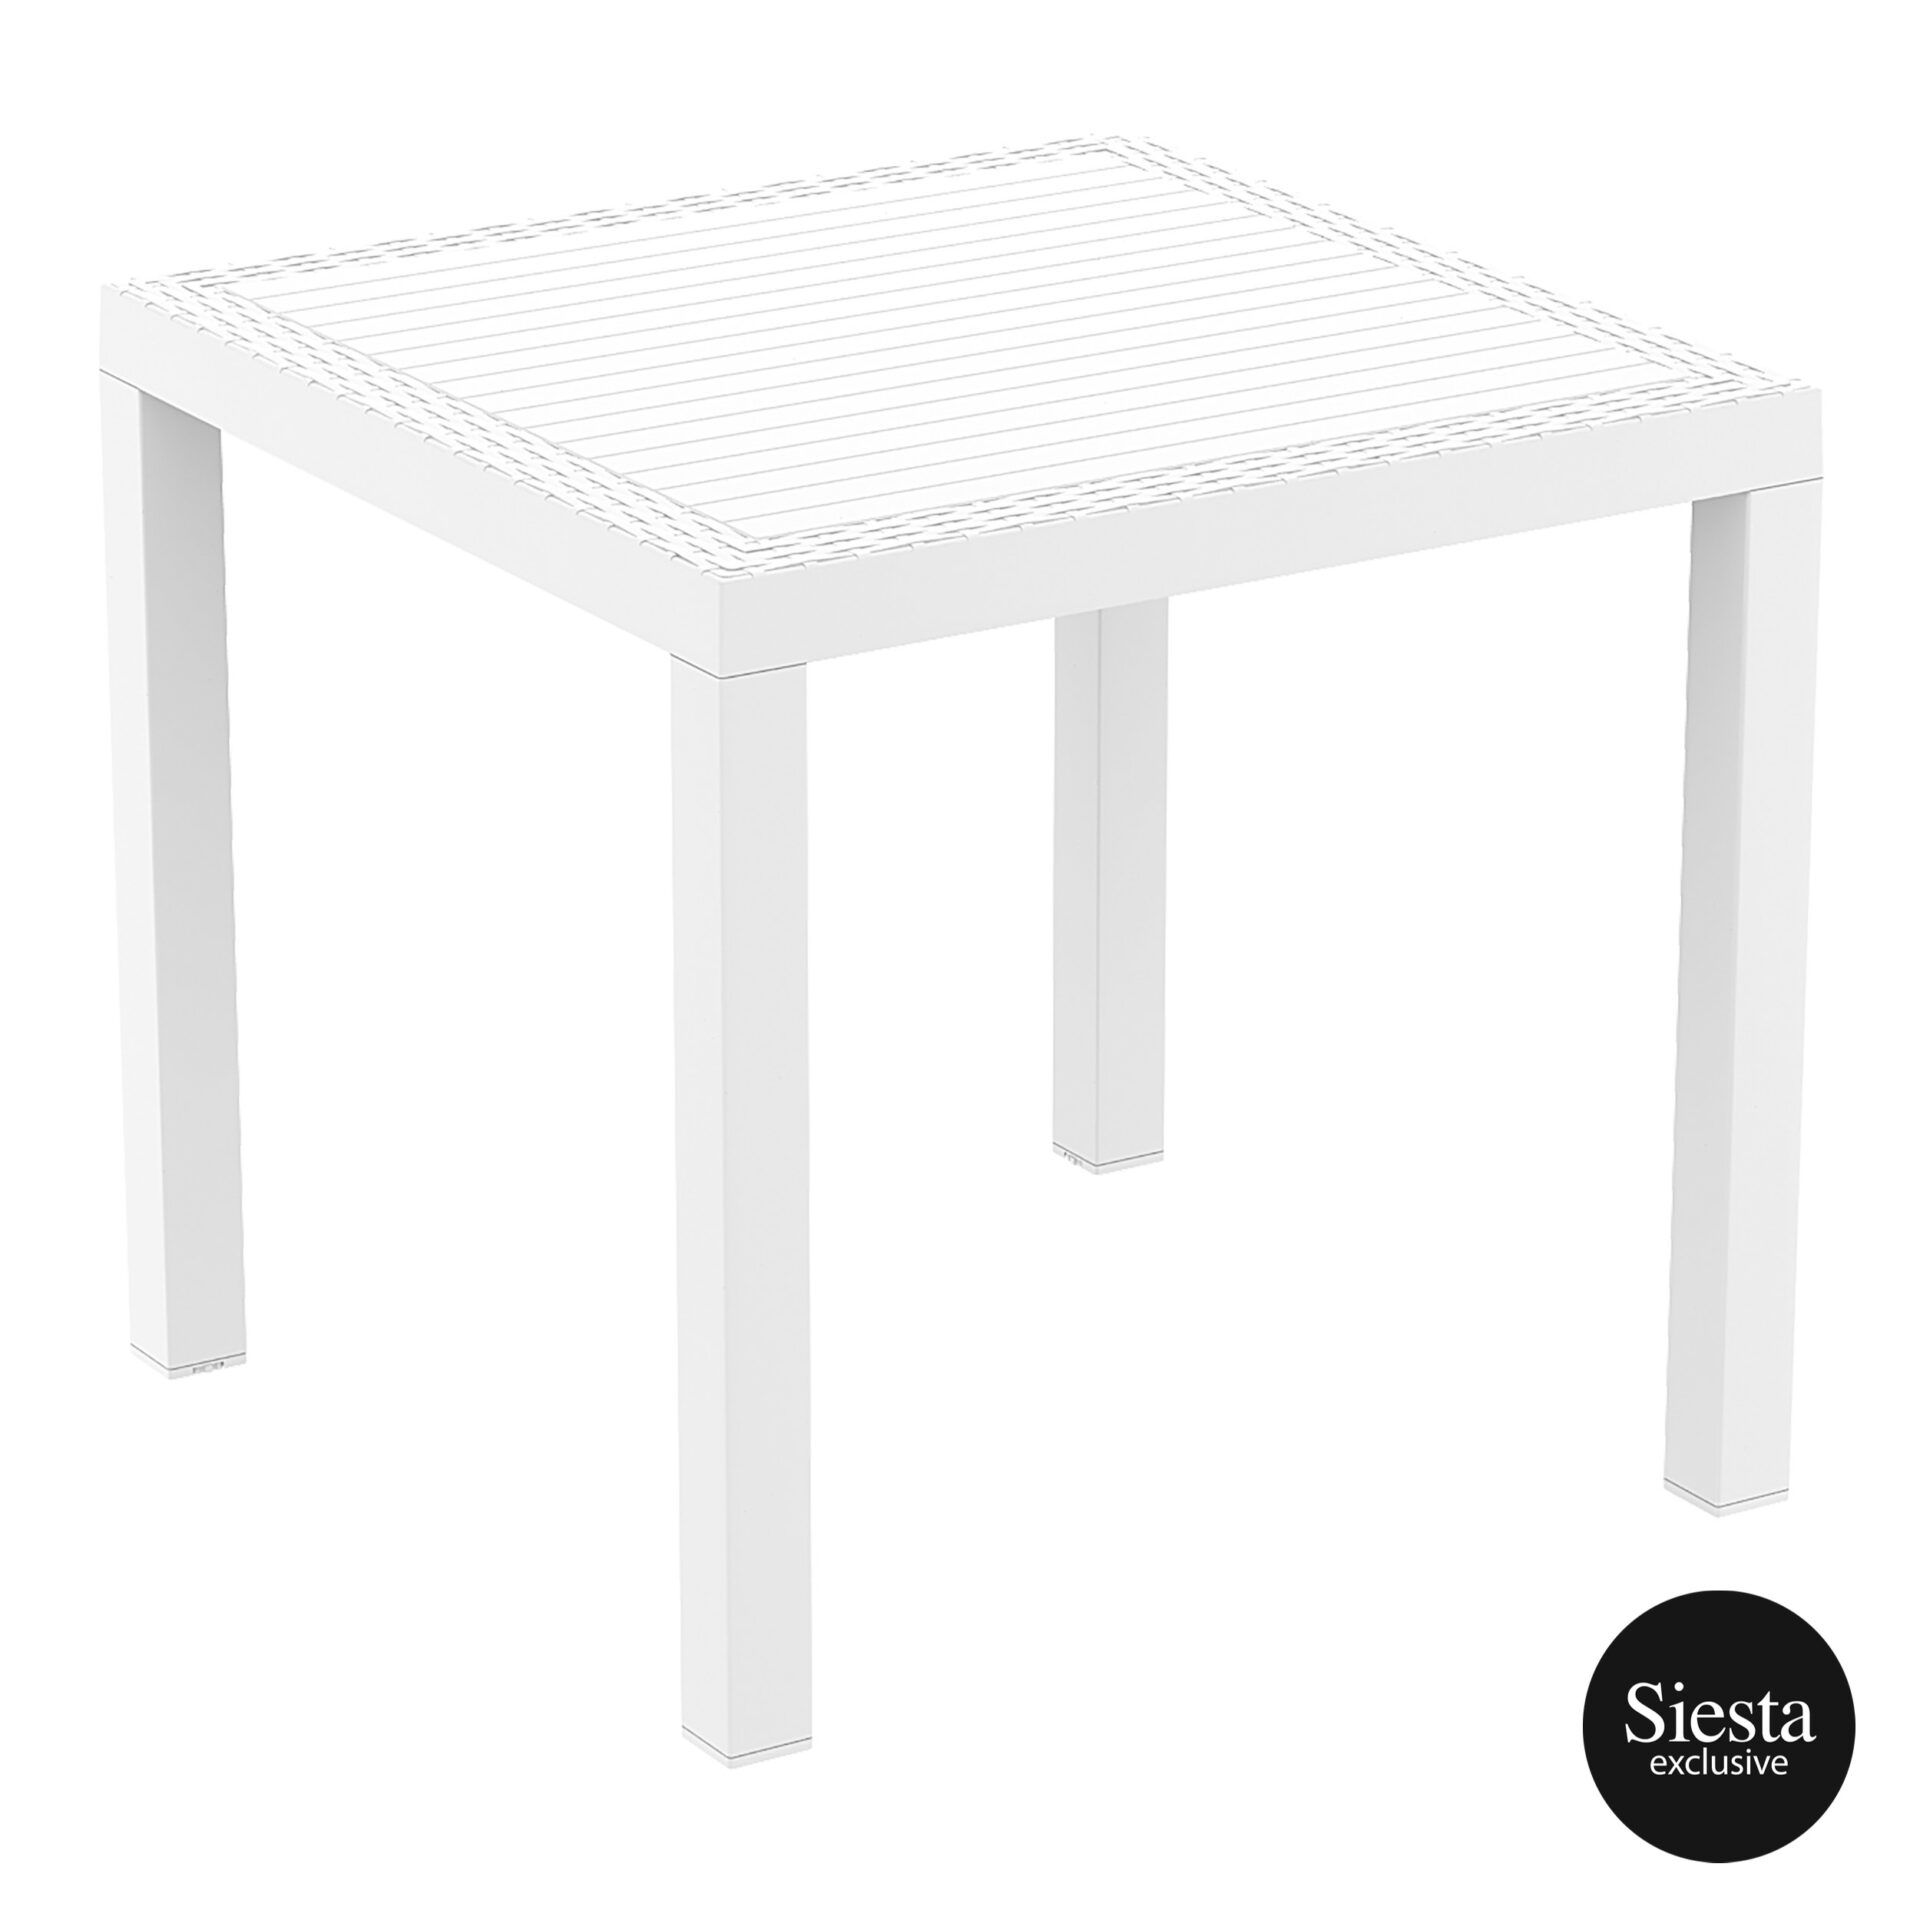 outdoor resin rattan cafe plastic top bali table 80 white front side